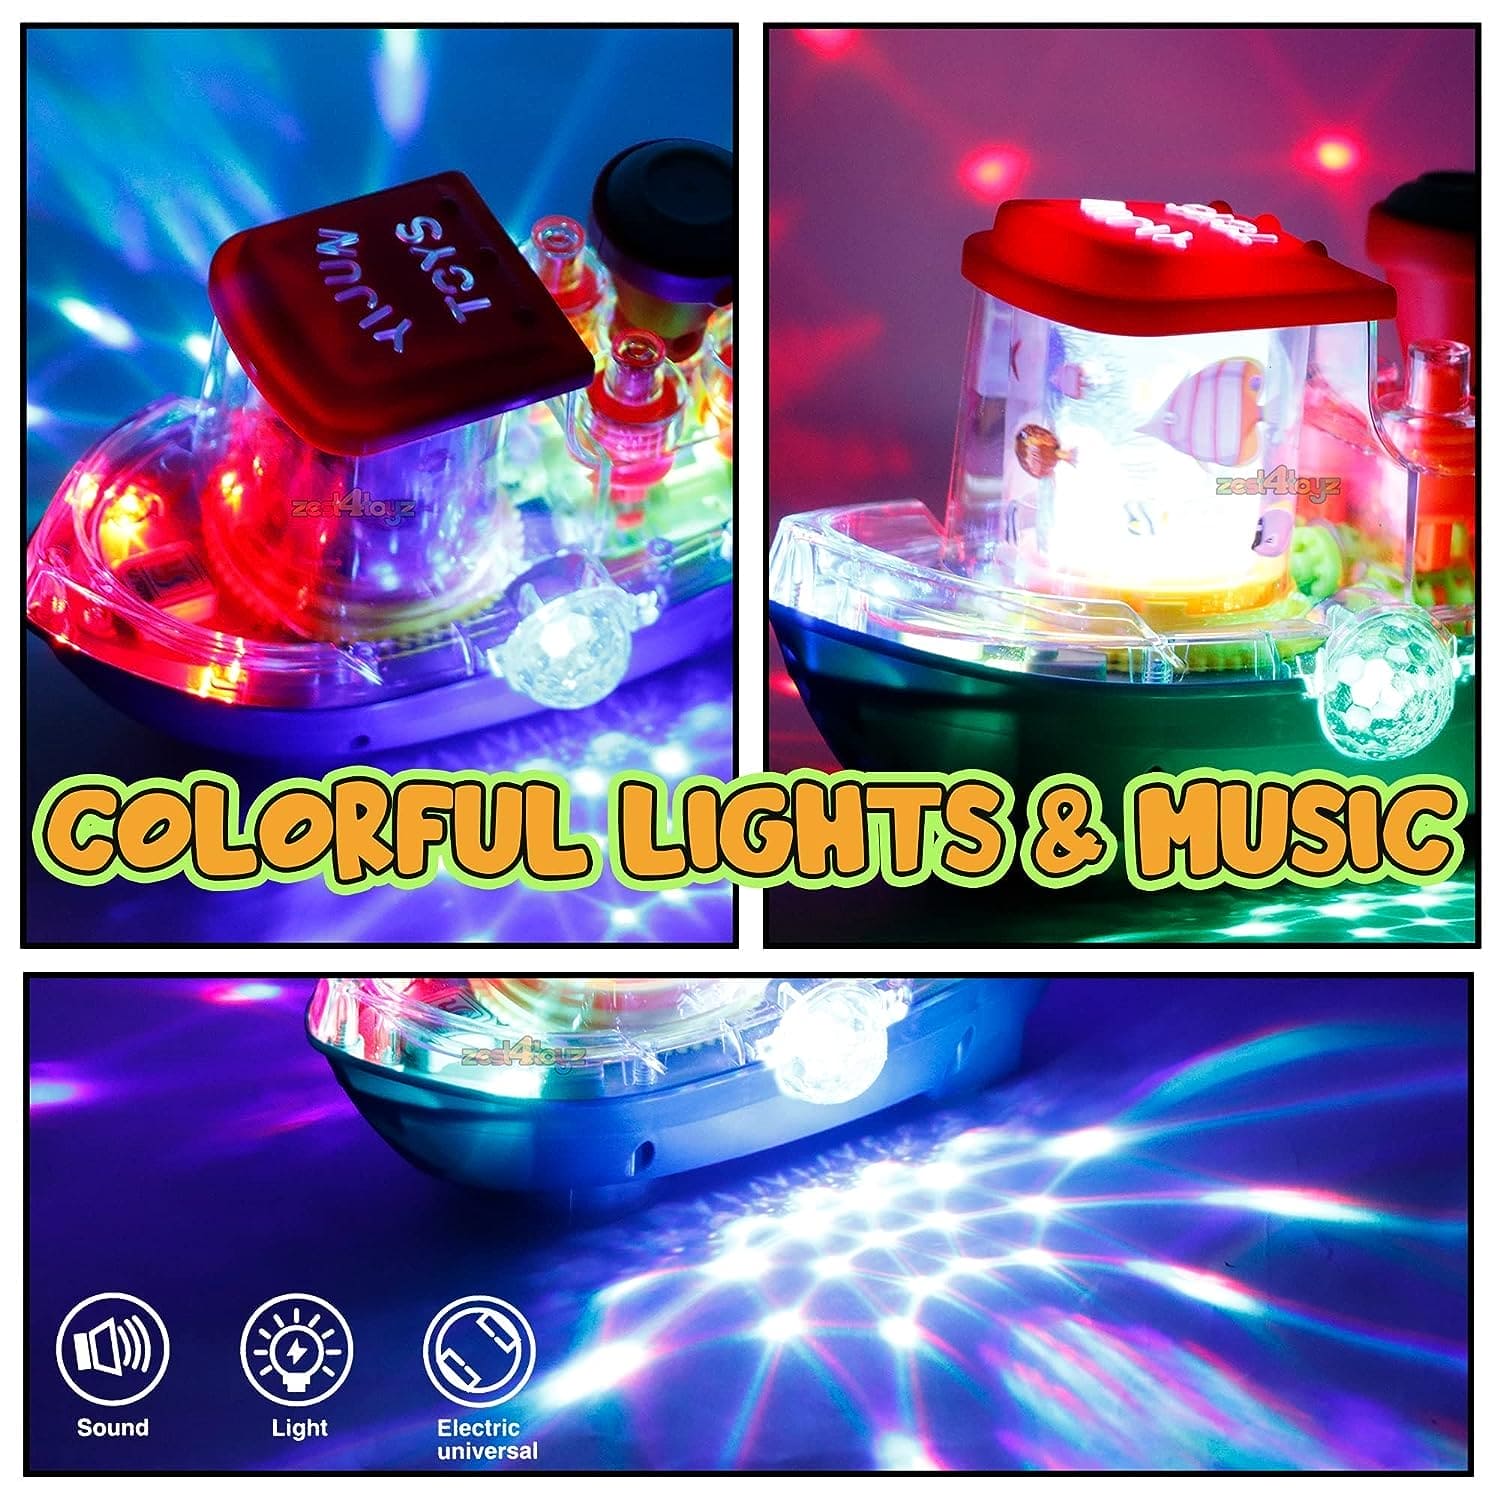 Gear Land Ship, Musical Toy Boat with Colorful Light, Transparent Rotatable Concept Boat, Underwater World Cruise Ship Toy For Kid, Battery Operated Toy Boat with Rotating Fishing Lamp Toy, Children's Toy Boat